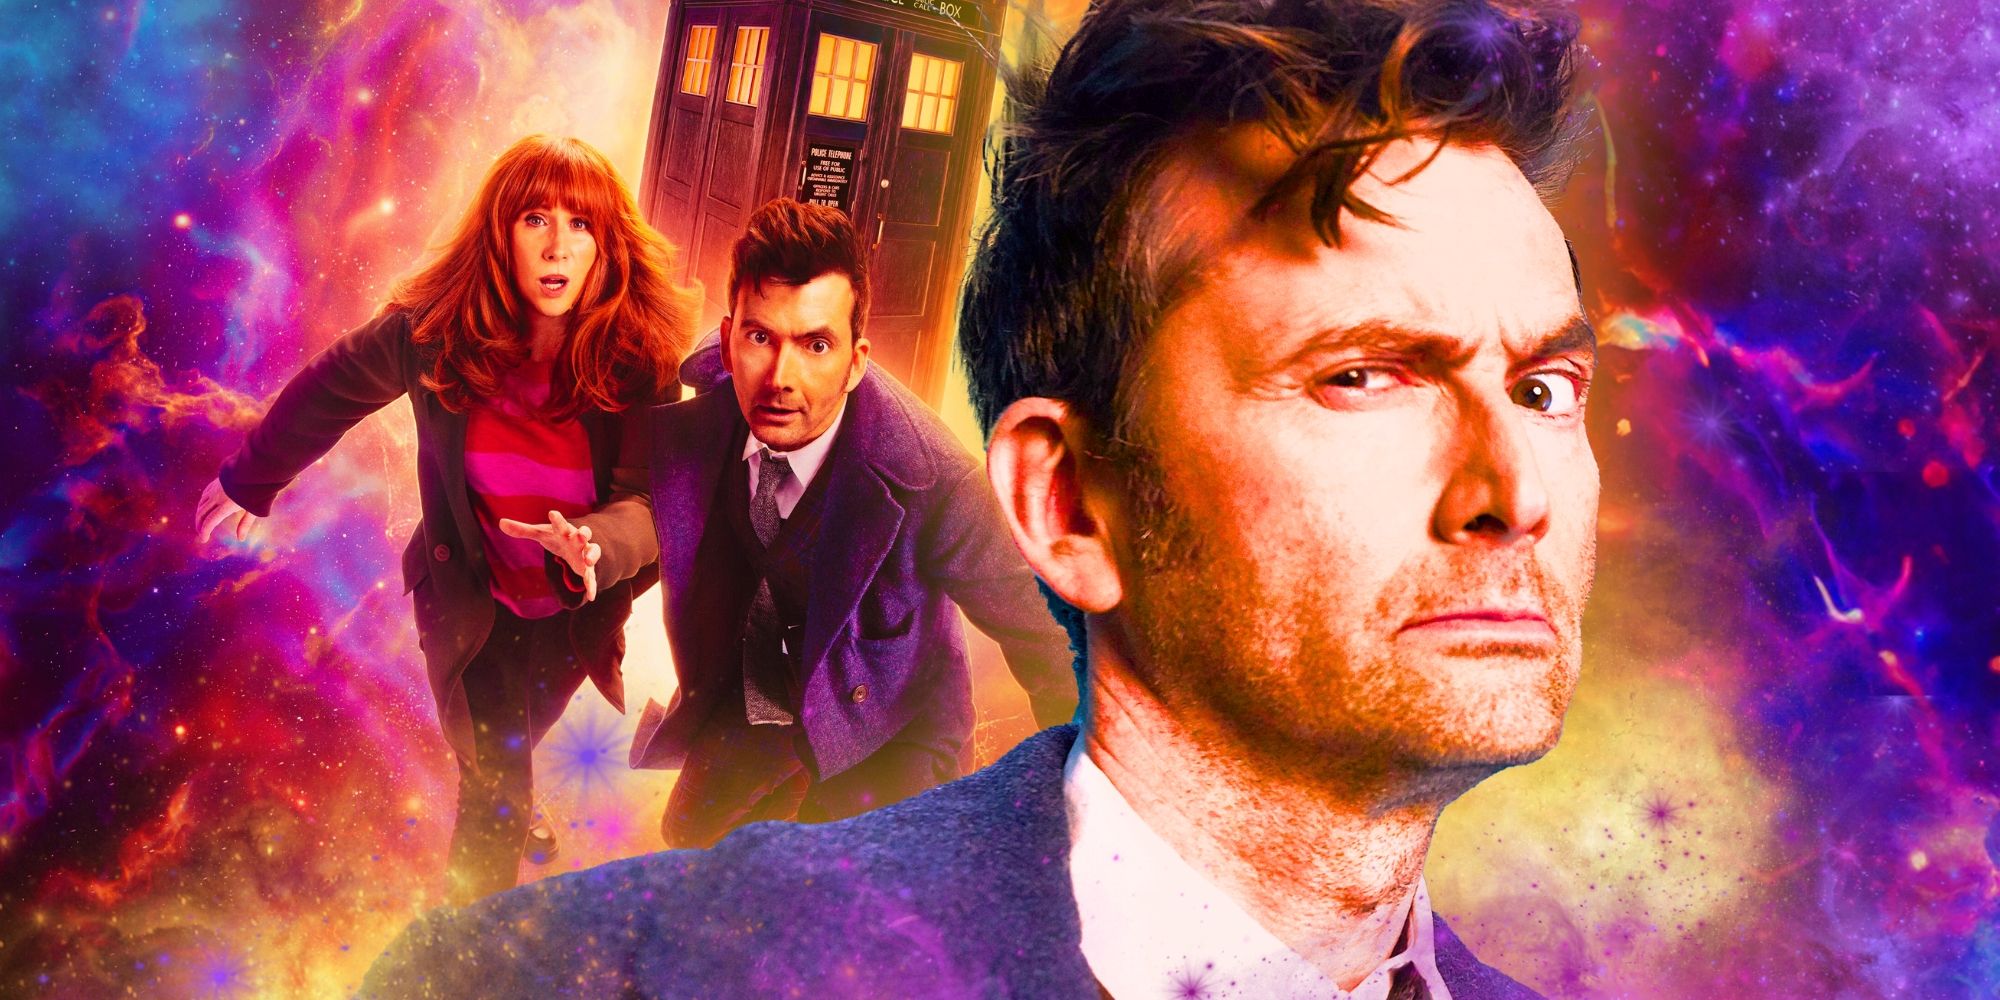 A custom image of David Tennant as the Doctor and Catherine Tate as Donna Noble in Doctor Who